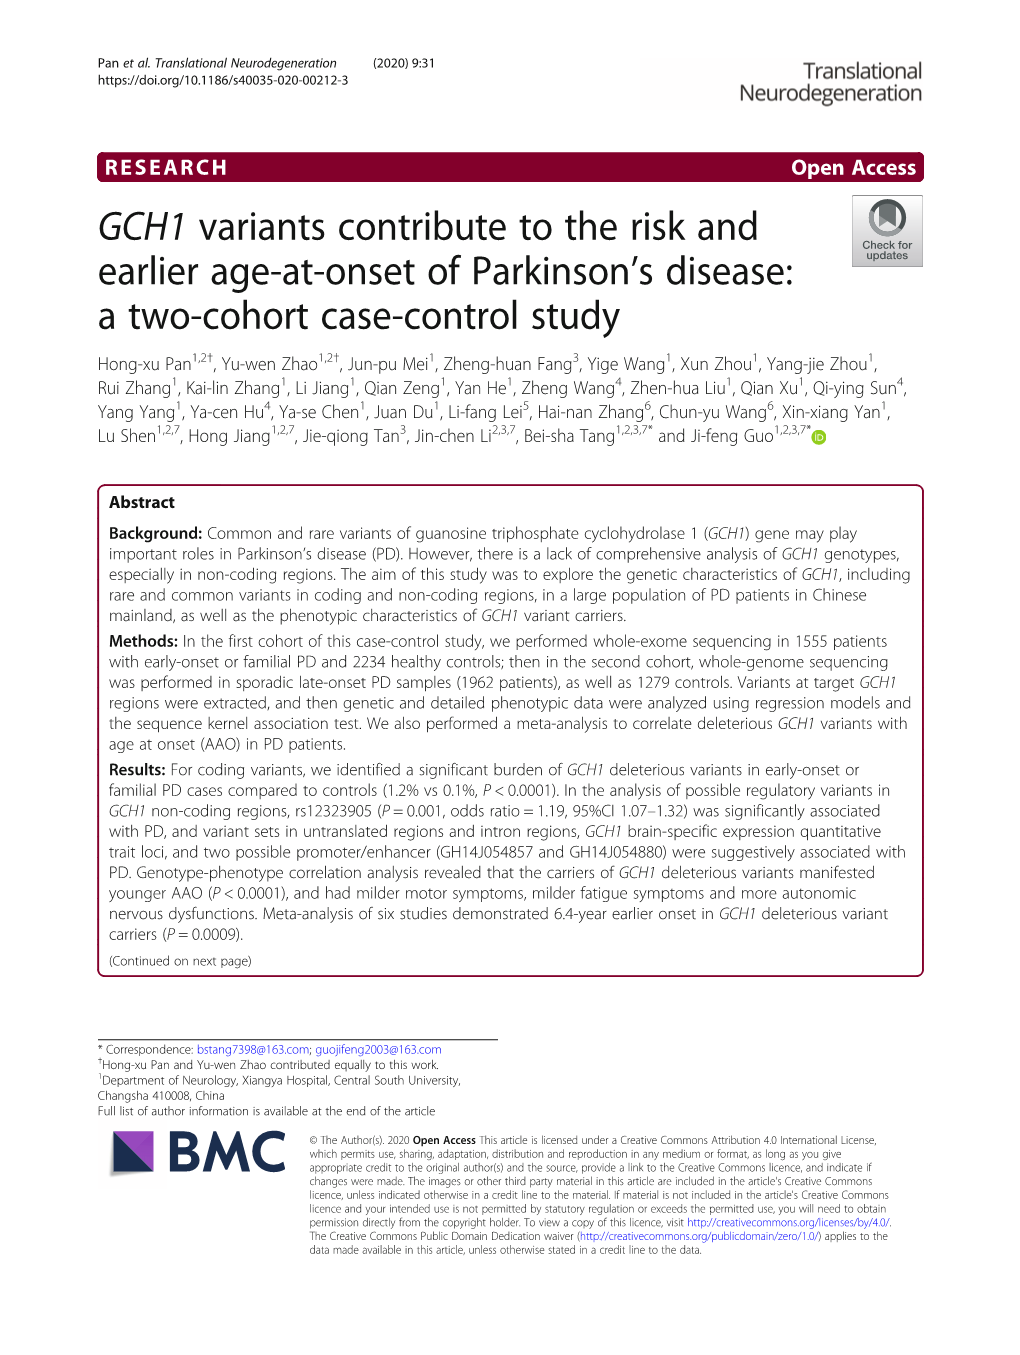 GCH1 Variants Contribute to the Risk and Earlier Age-At-Onset Of